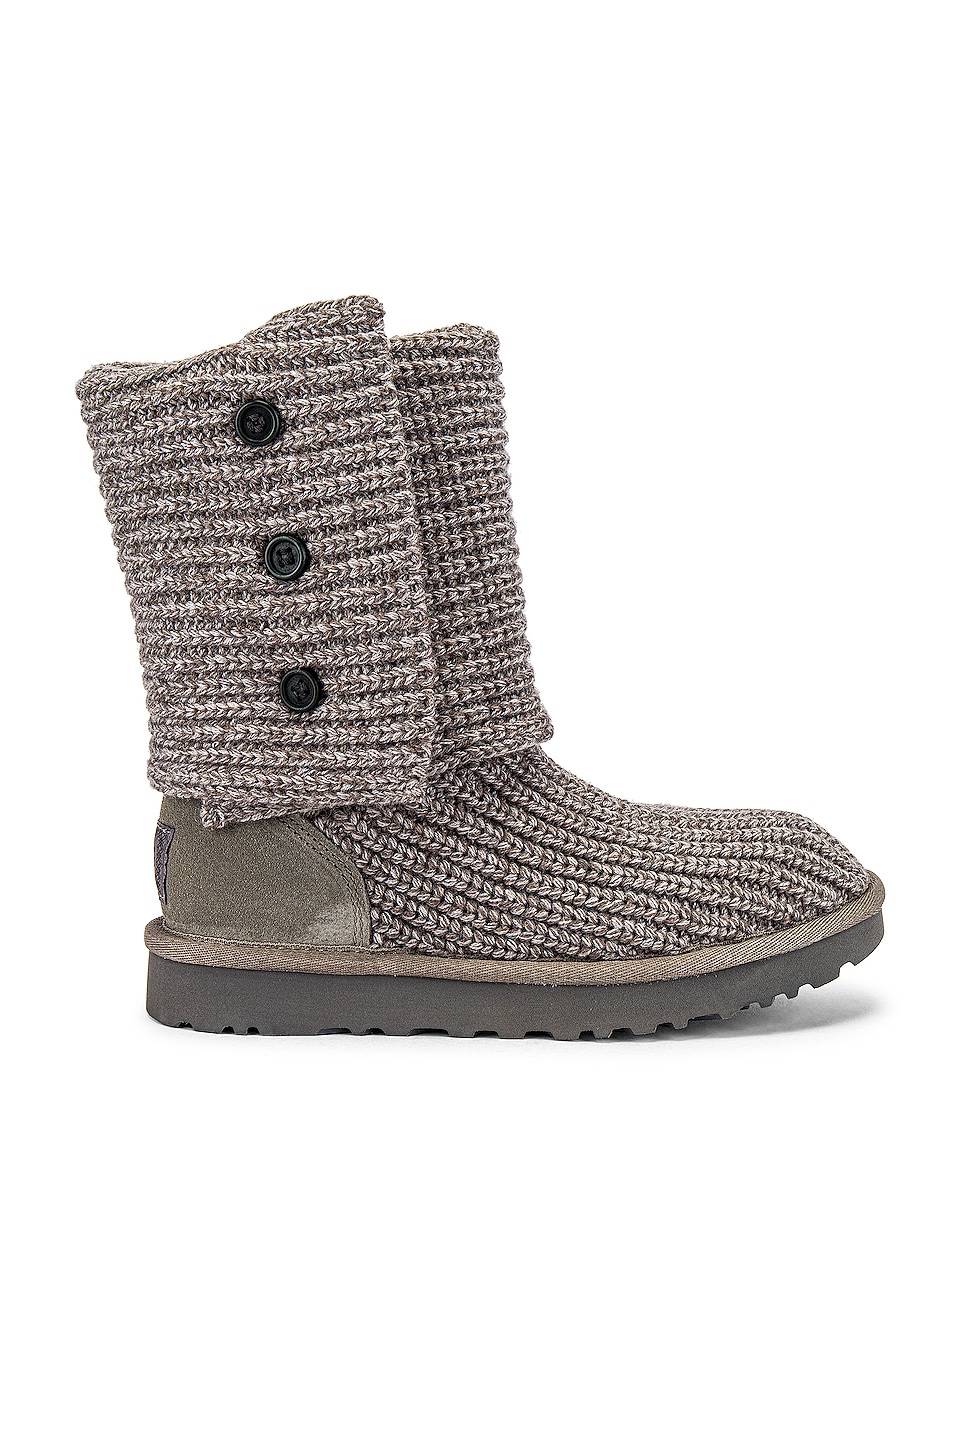 UGG Classic Cardy Boot in Grey | REVOLVE